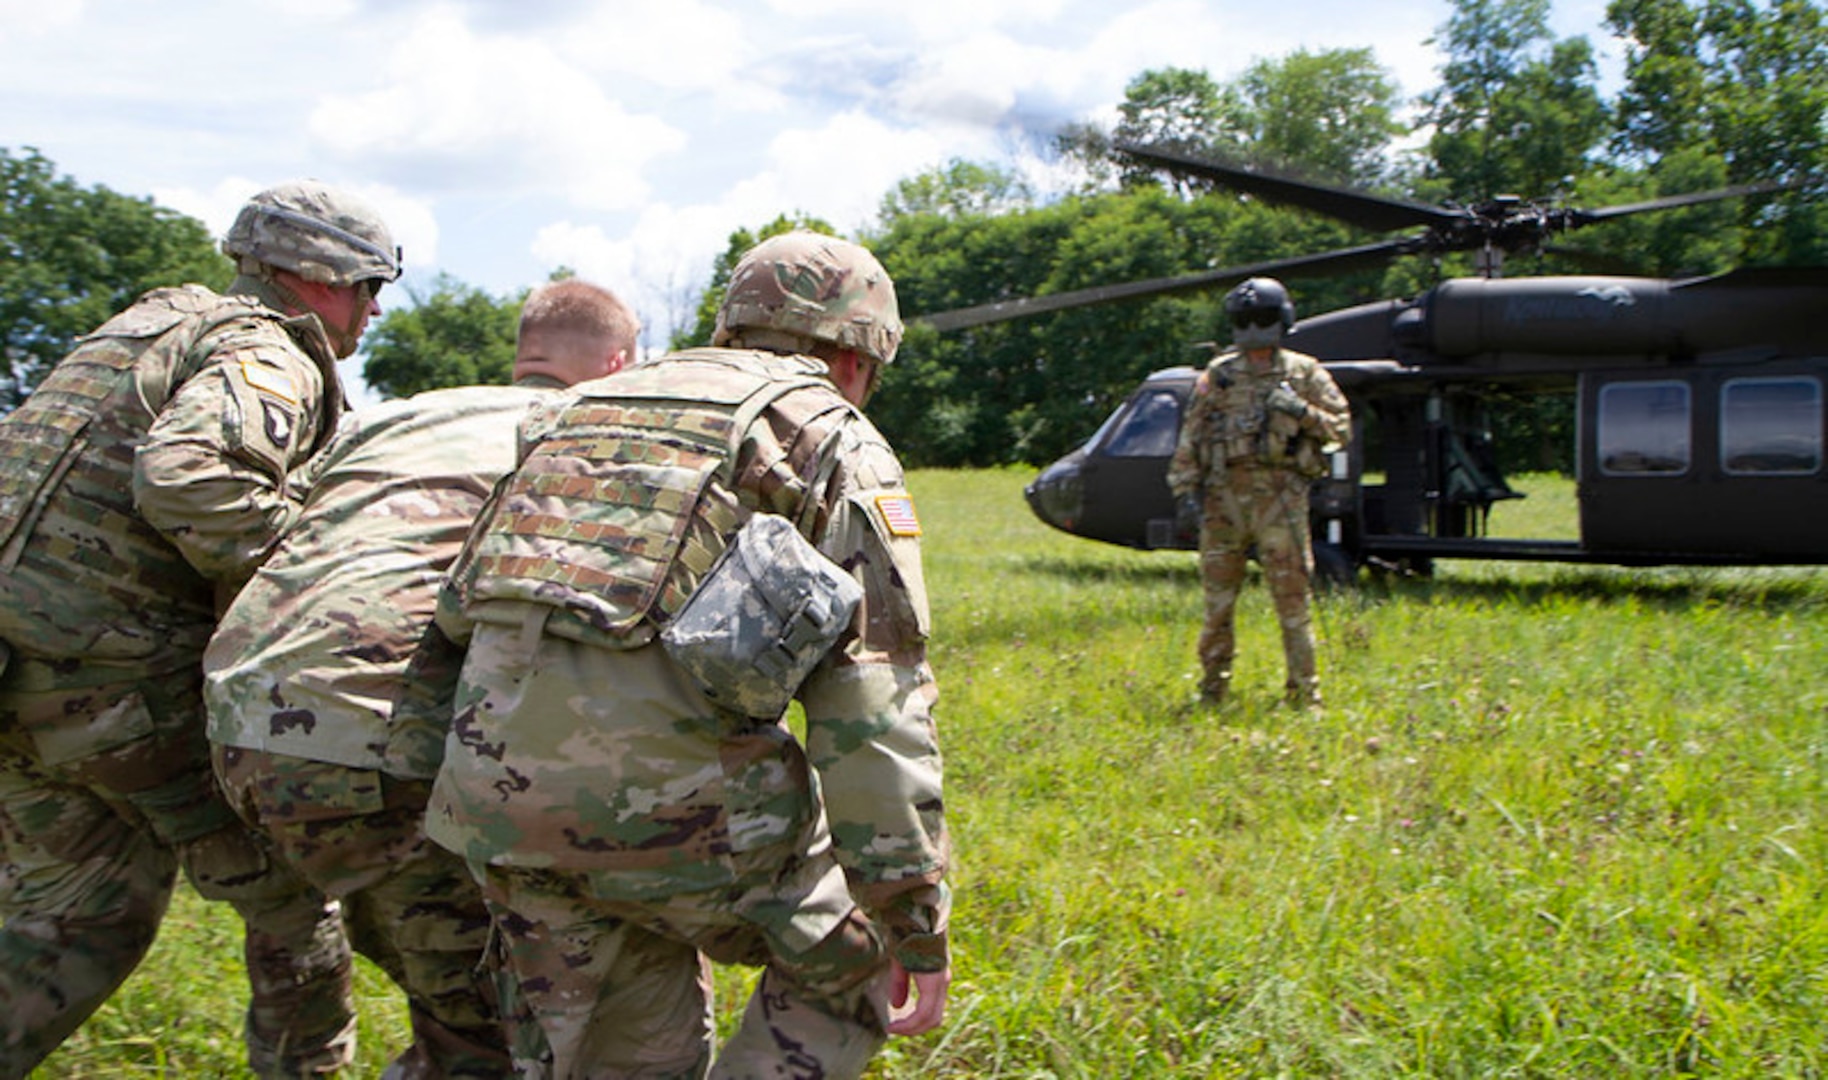 Kentucky National Guard Soldiers with the 617th Military Police Company help a simulated injured person to a UH-60 Black Hawk helicopter during casualty evacuation training at Blue Grass Army Depot in Richmond, Ky., Aug. 12, 2020.